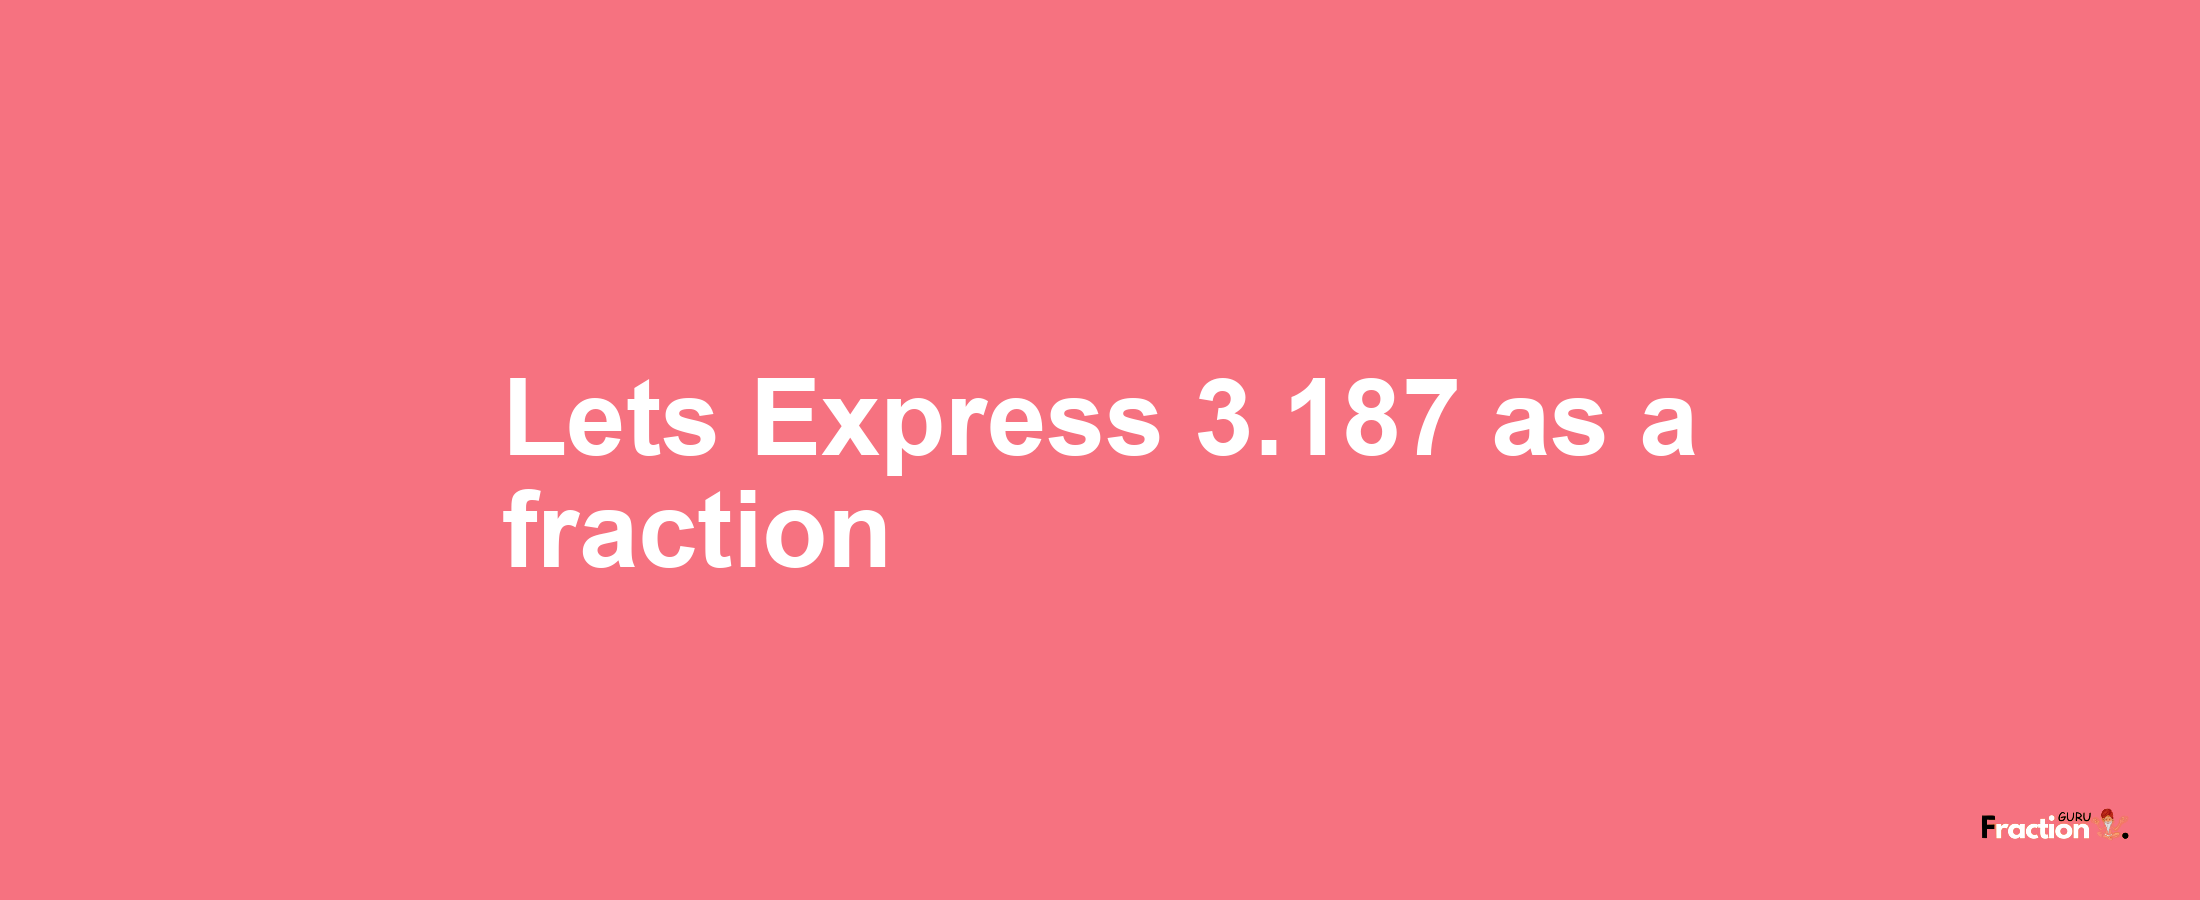 Lets Express 3.187 as afraction